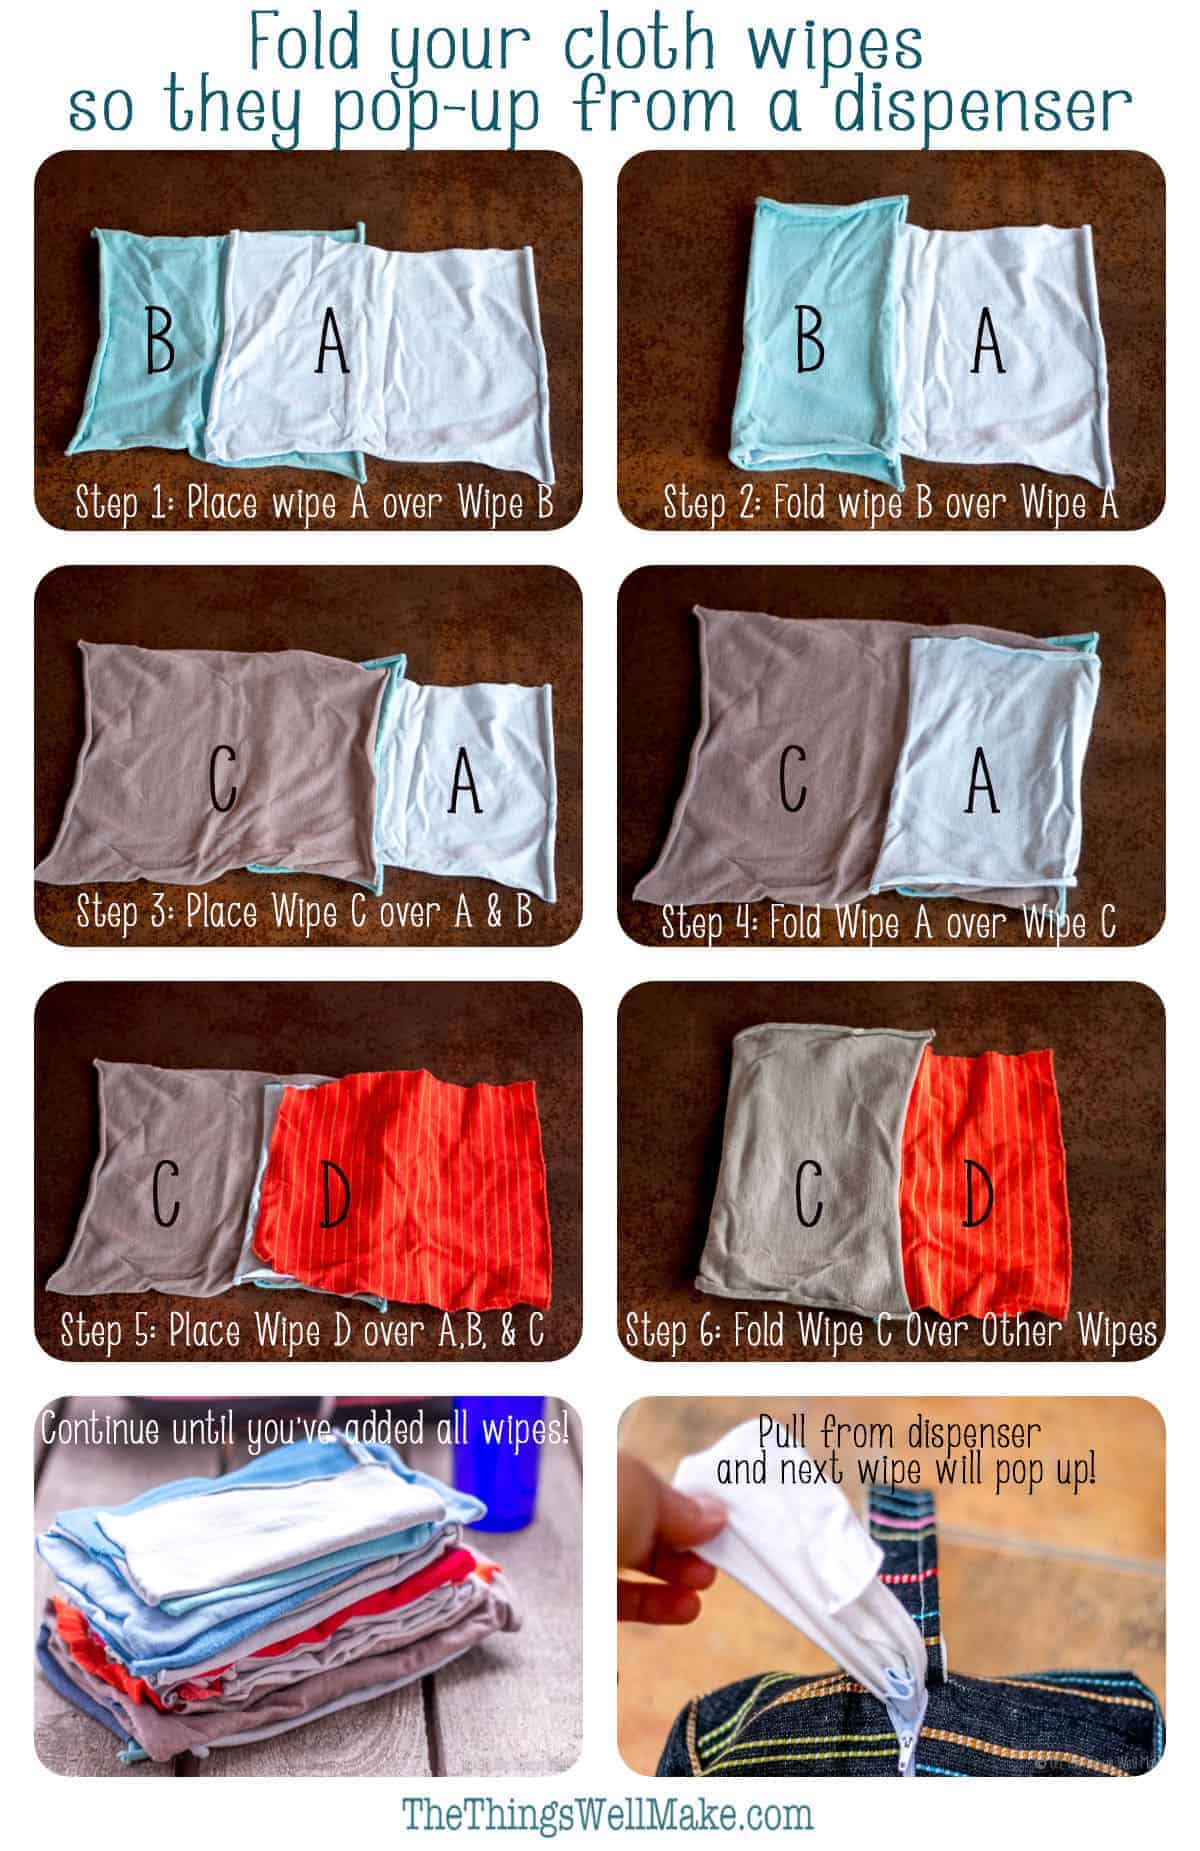 collage of photos showing how to fold cloth wipes so that they pop up from a dispenser